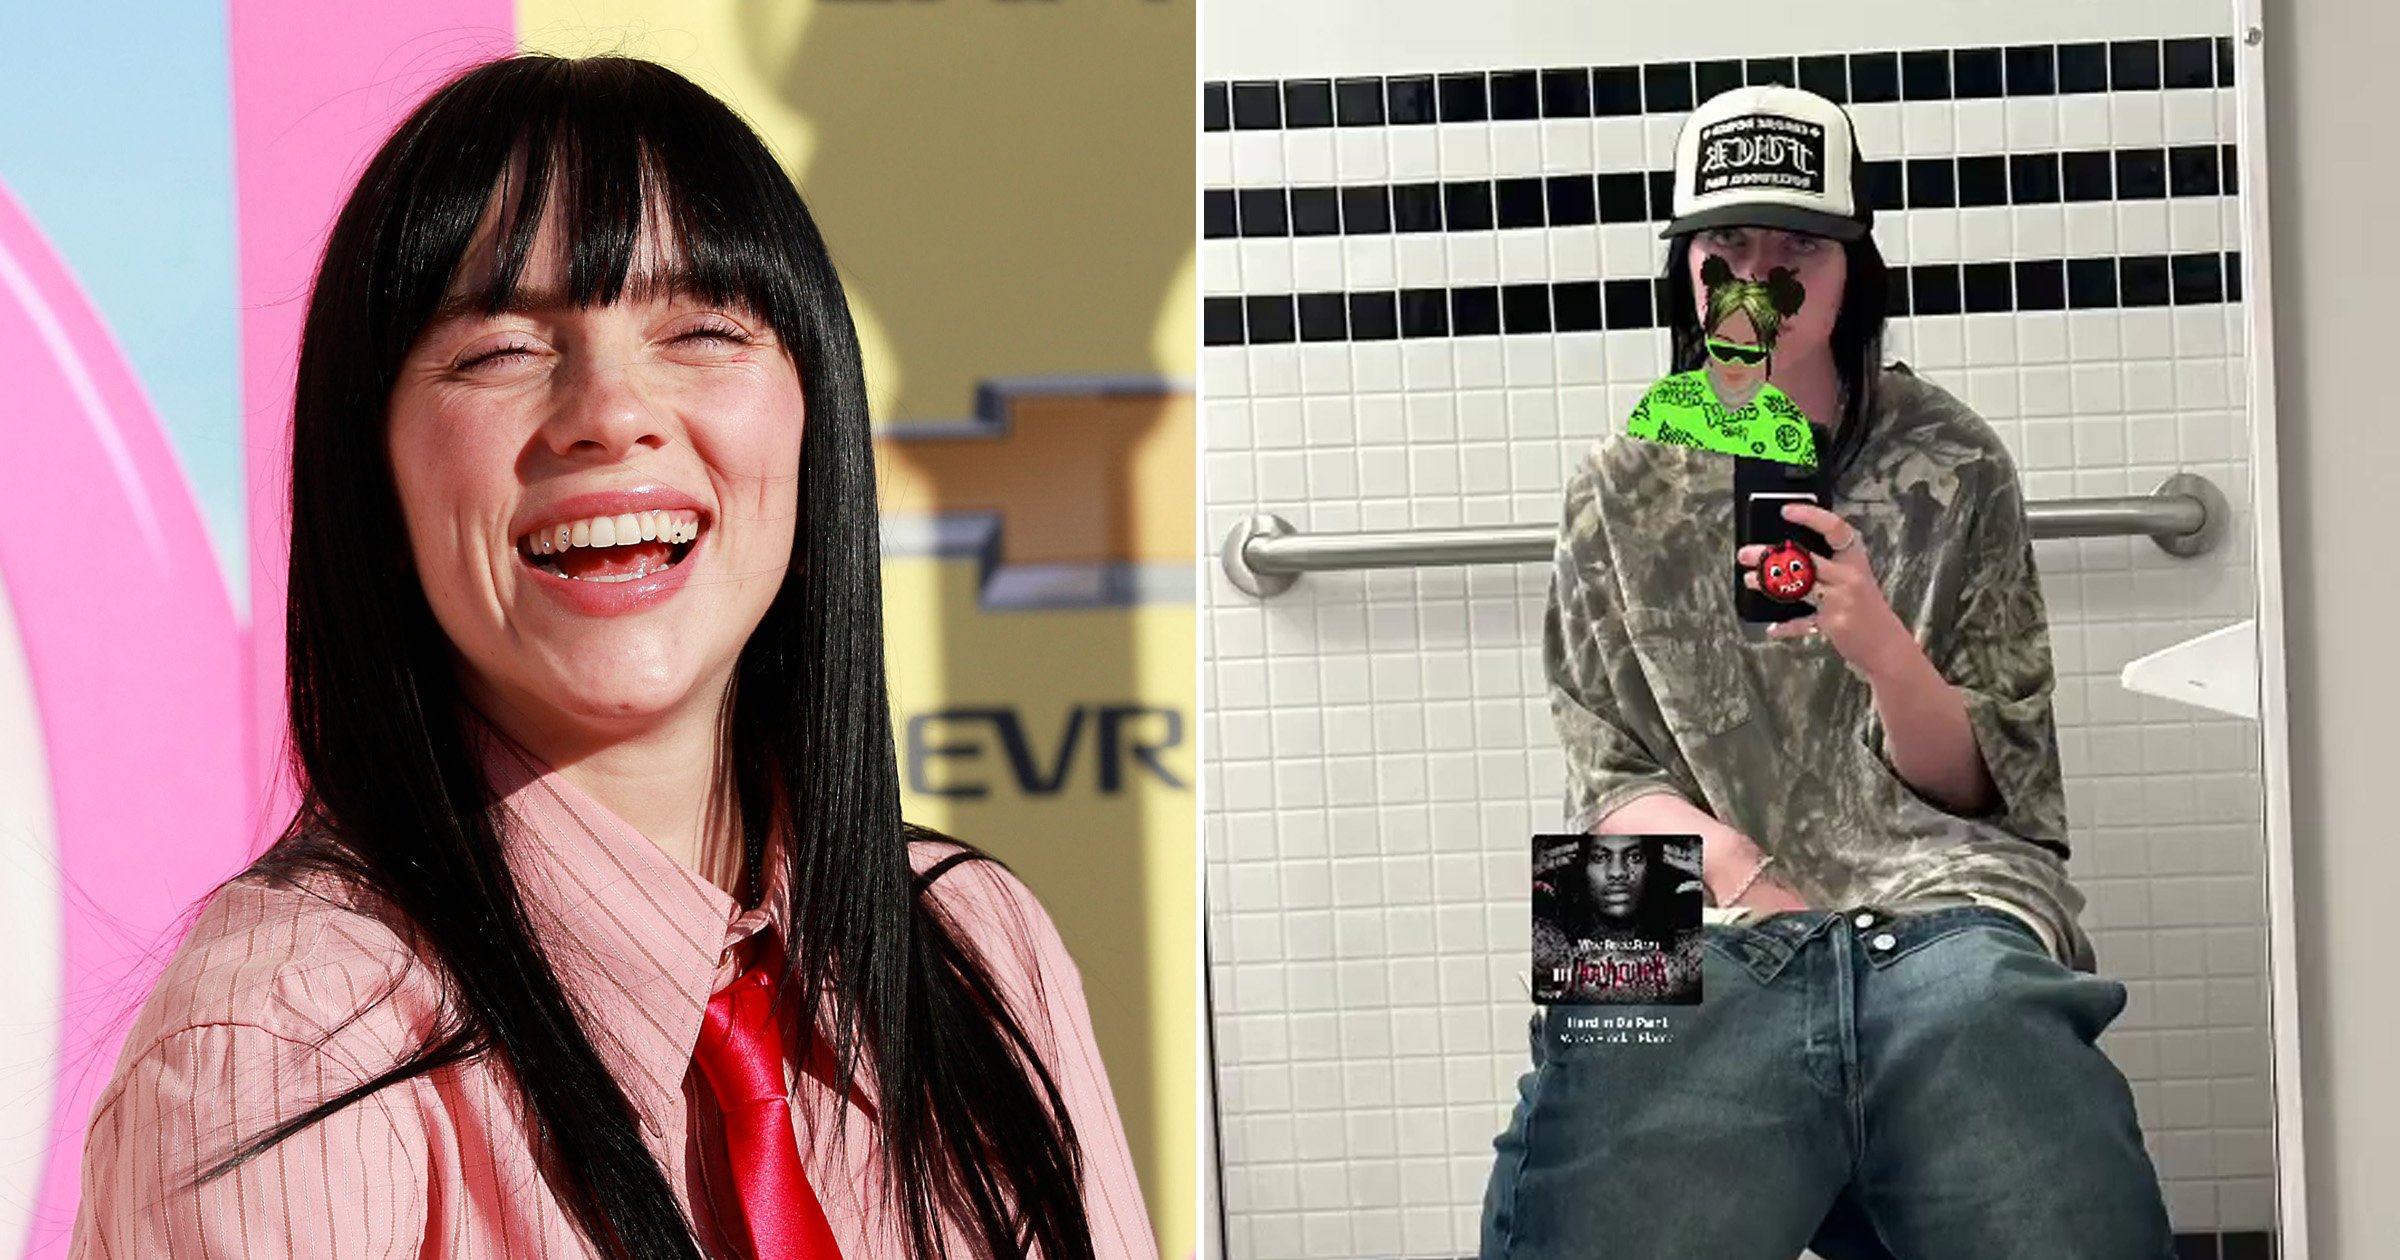 Billie Eilish proves she can look cool anywhere – even while chilling on the toilet